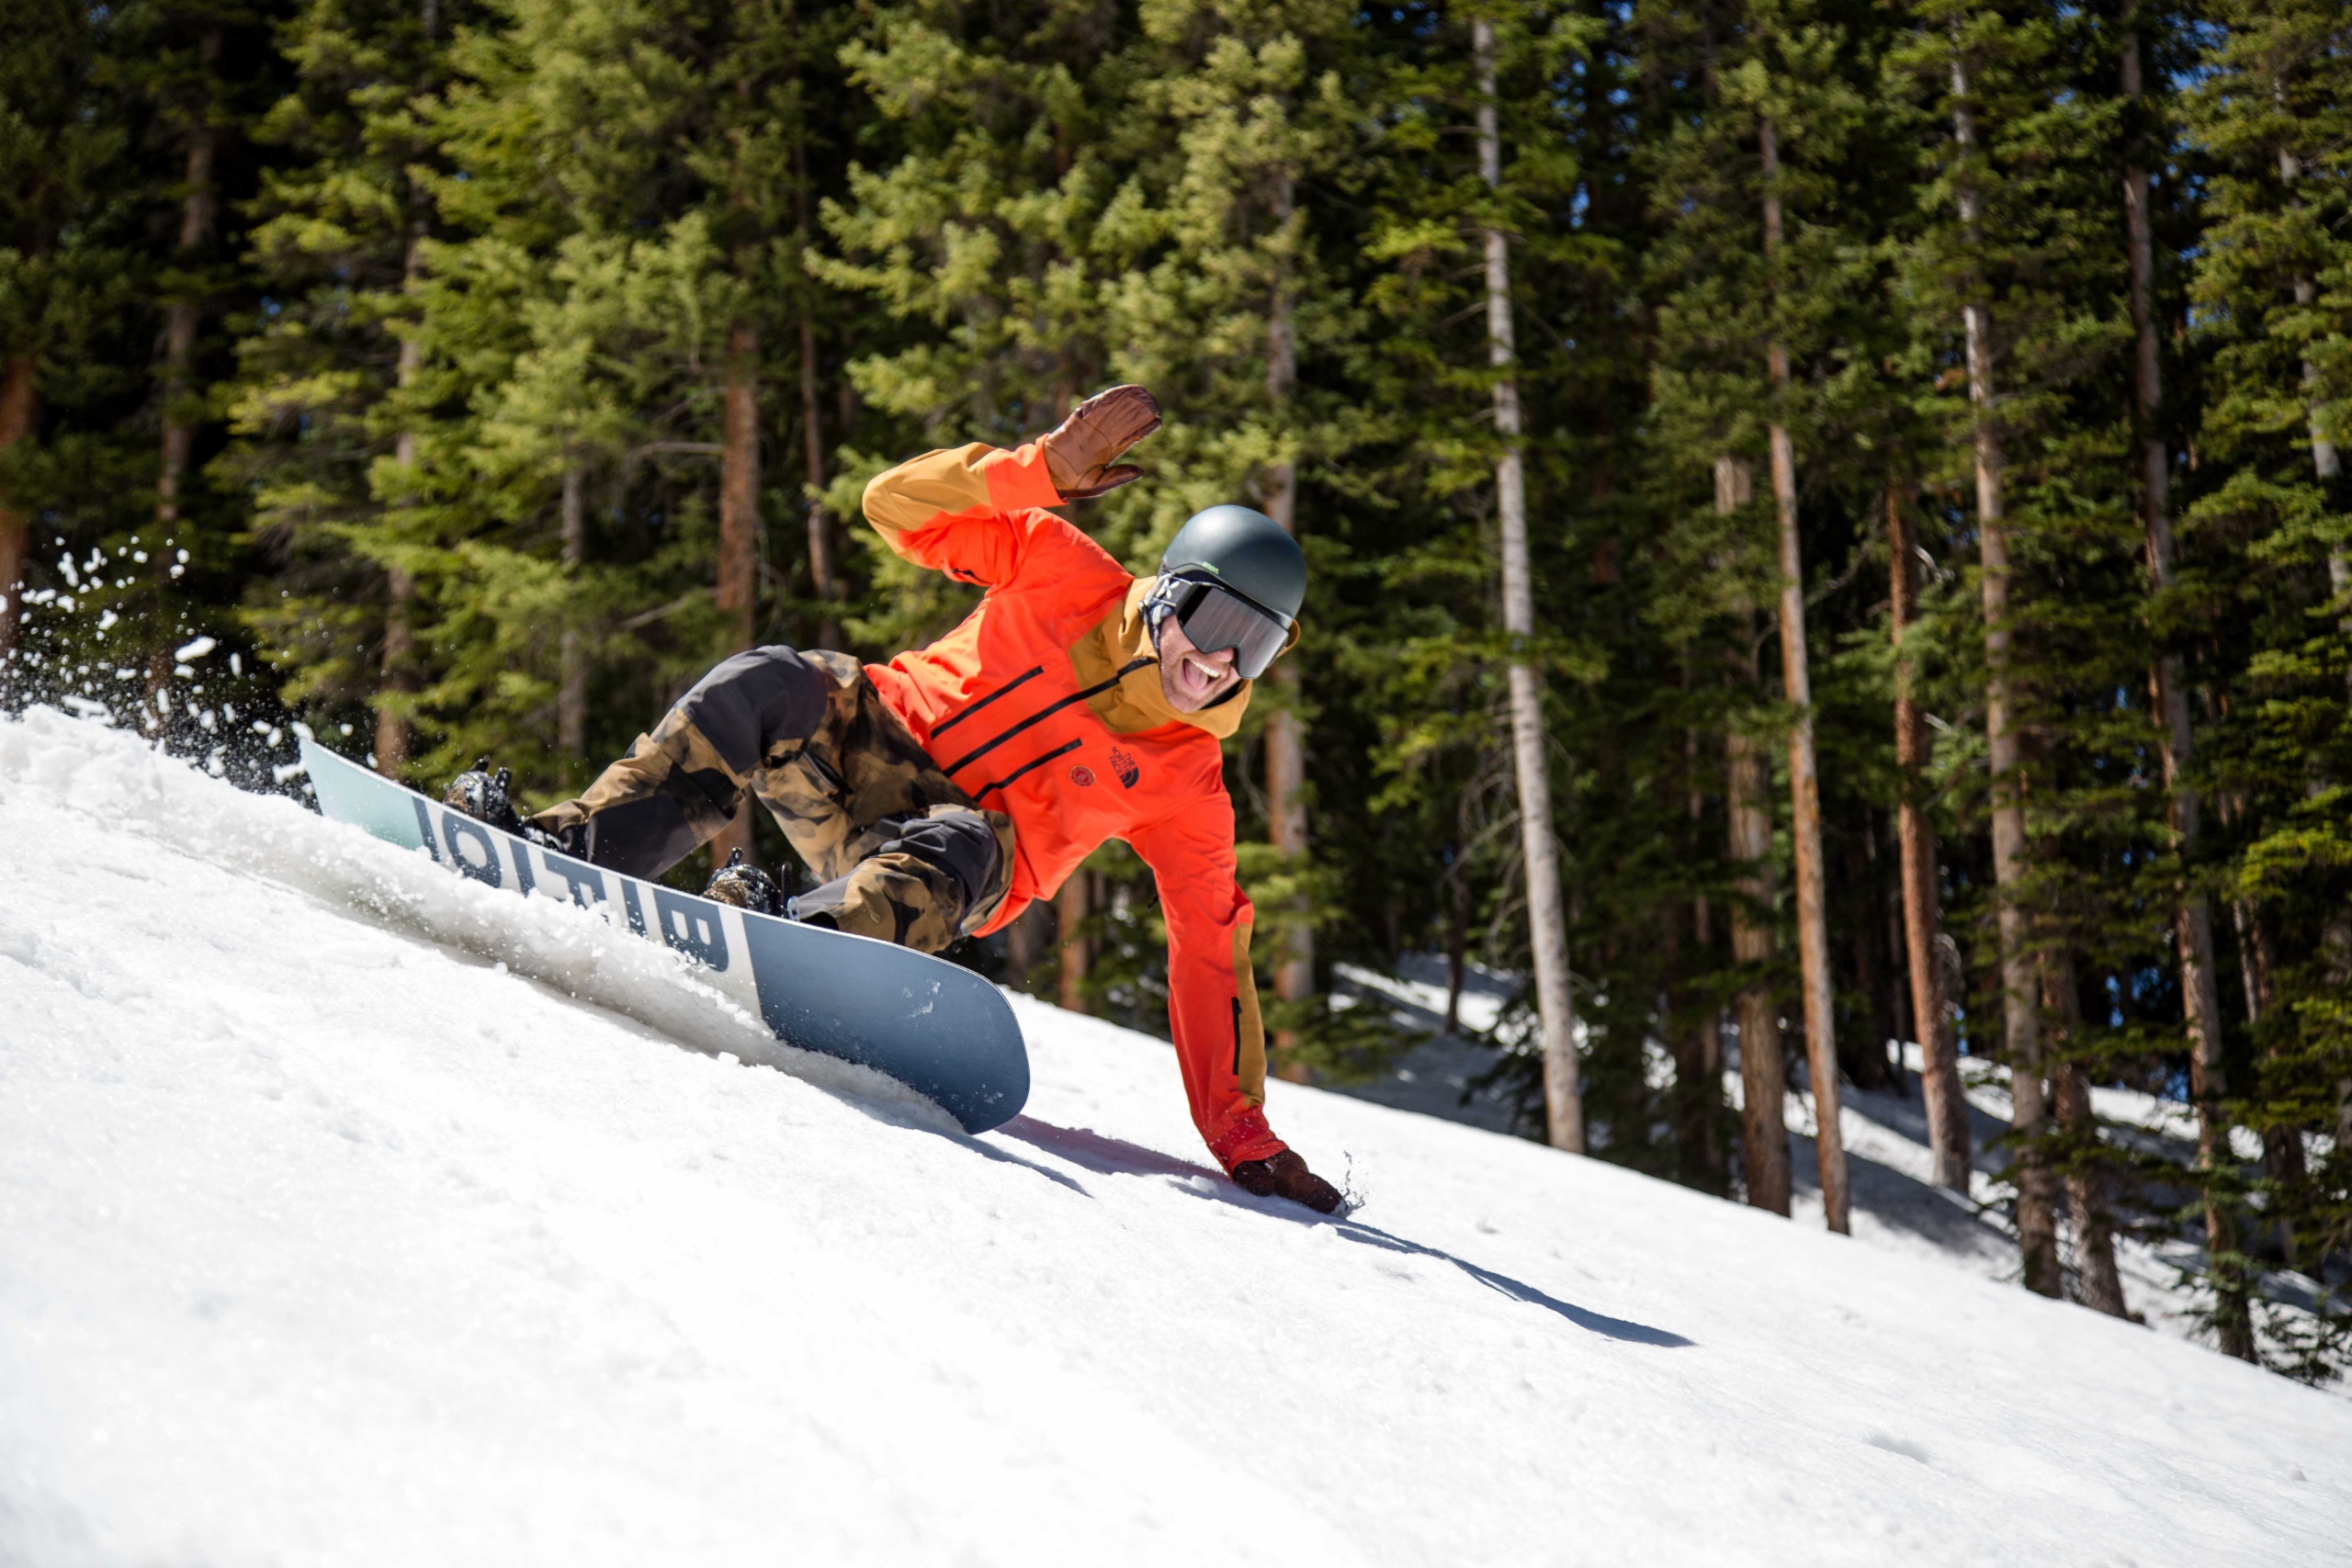 PSIA-AASI National Team Member Chris Rogers snowboard in The North Face outerwear.